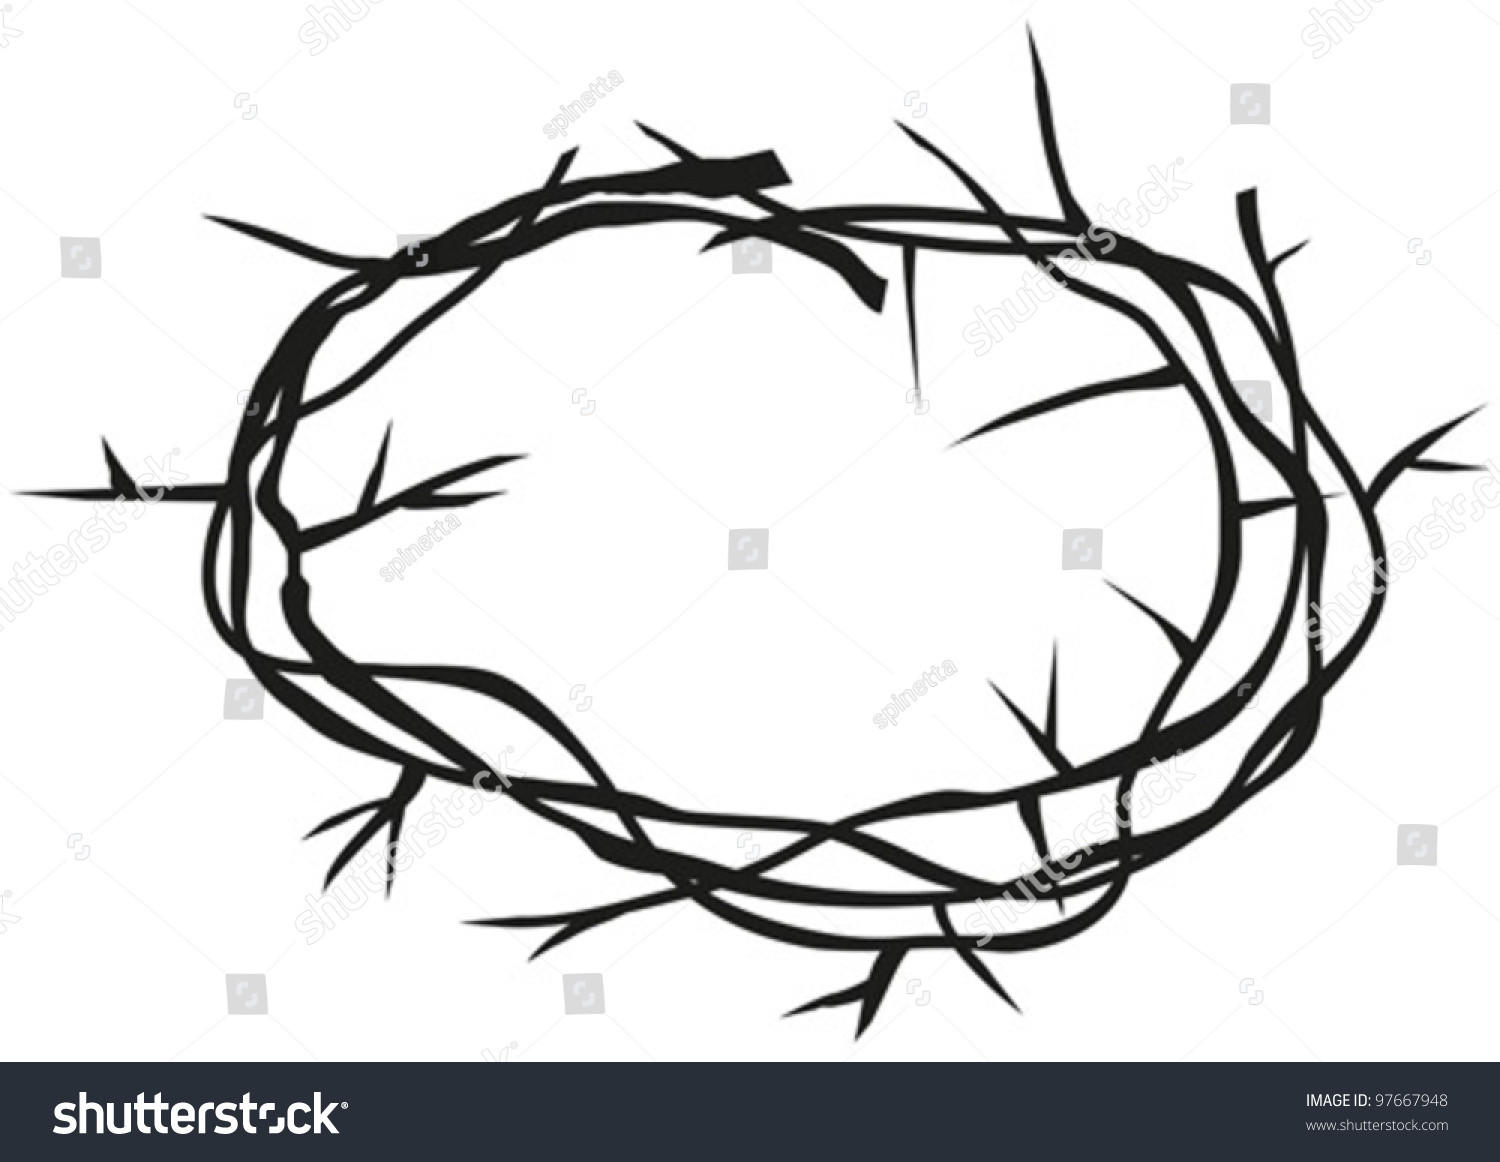 religious clip art crown of thorns - photo #50